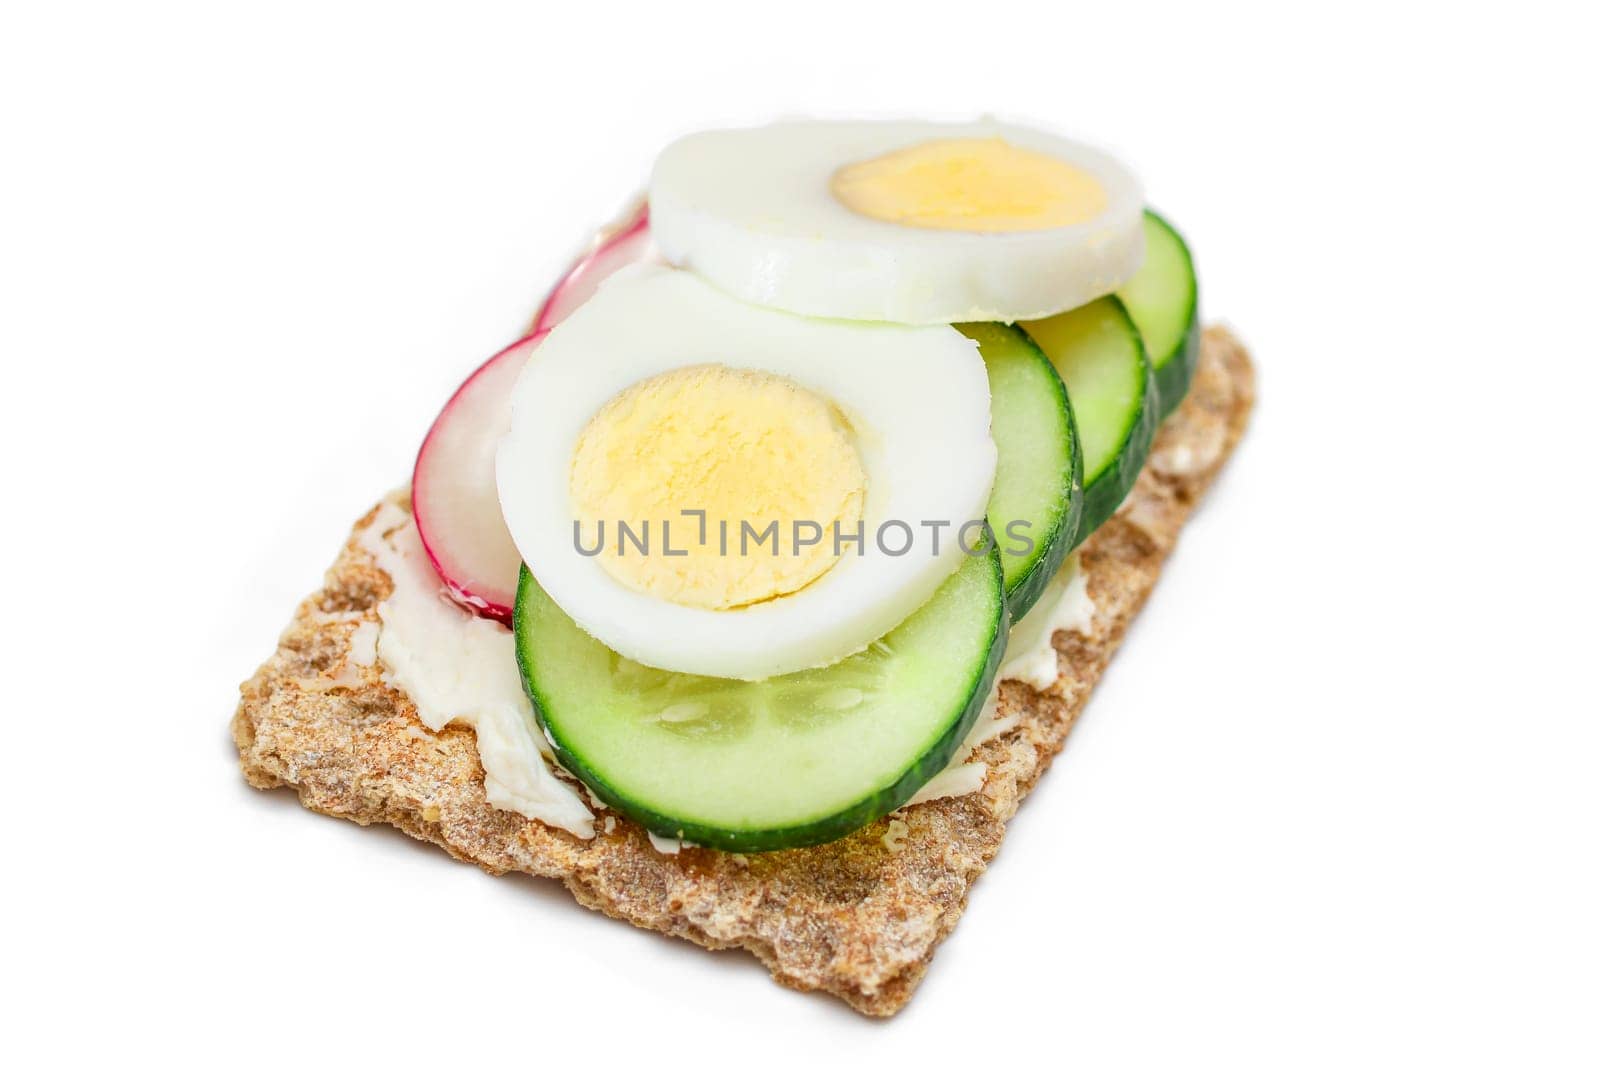 Whole Grain Crispbread with Fresh Cucumber, Egg, Cream Cheese and Radish - Isolated on White. Quick and Healthy Sandwiches. Crispbread with Tasty Filling. Healthy Dietary Snack - Isolation